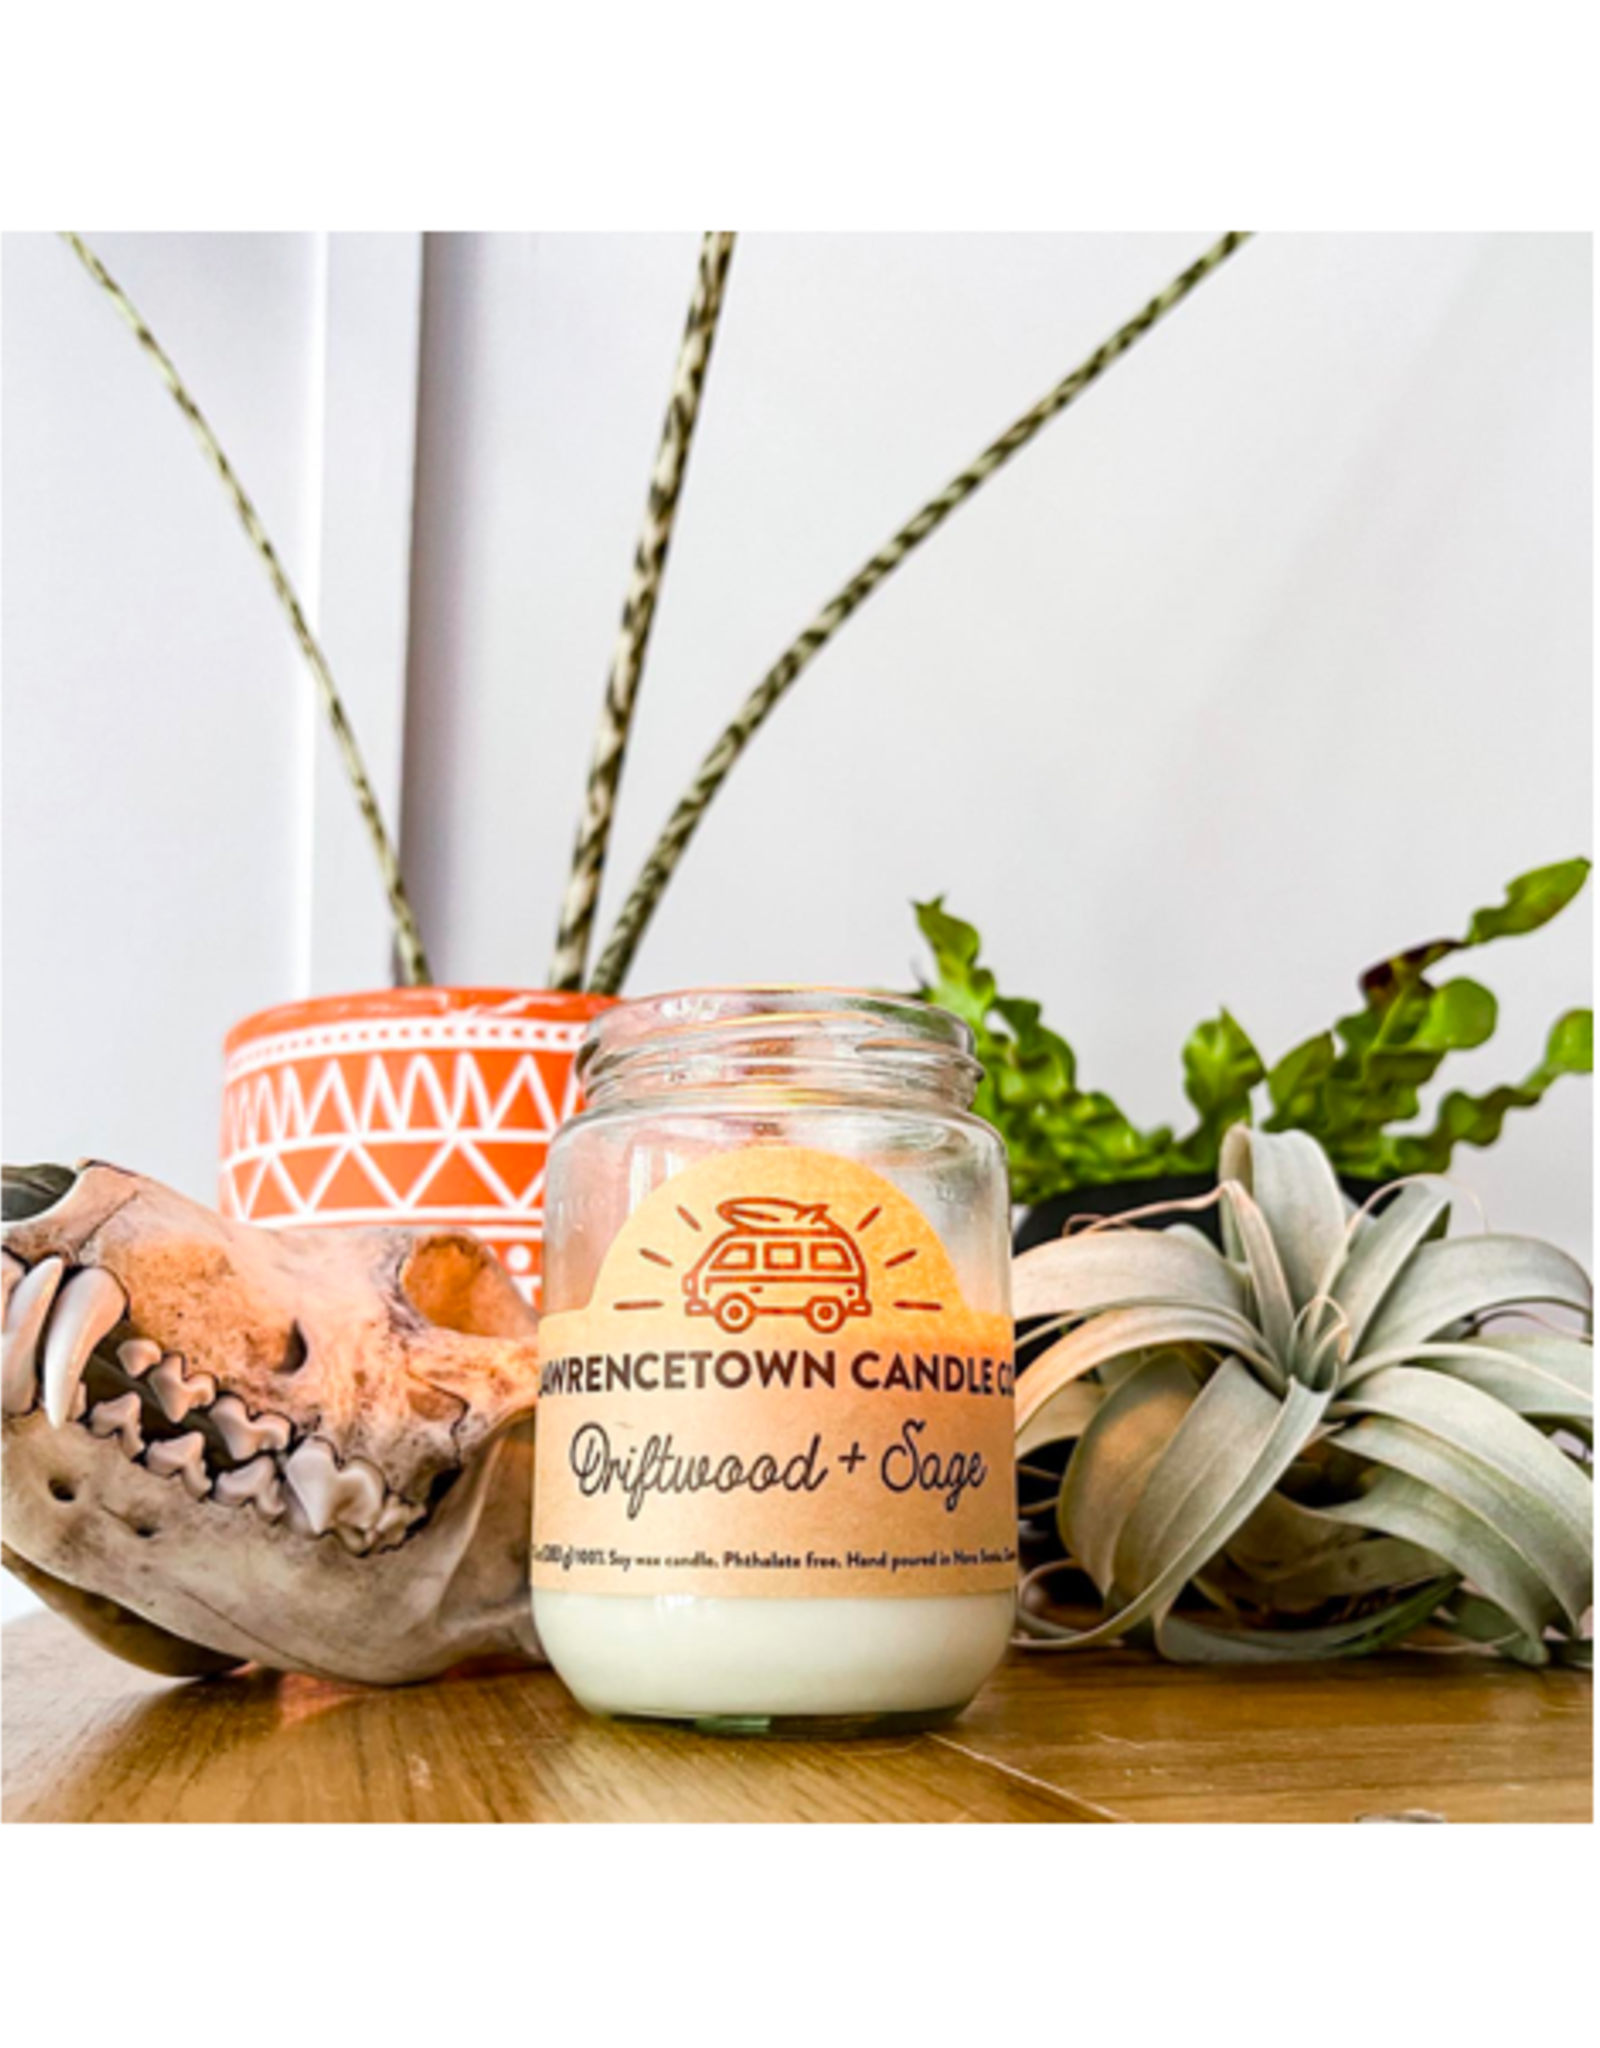 Lawrencetown Candle Co - Soy Candle / Driftwood & Sage, 6oz